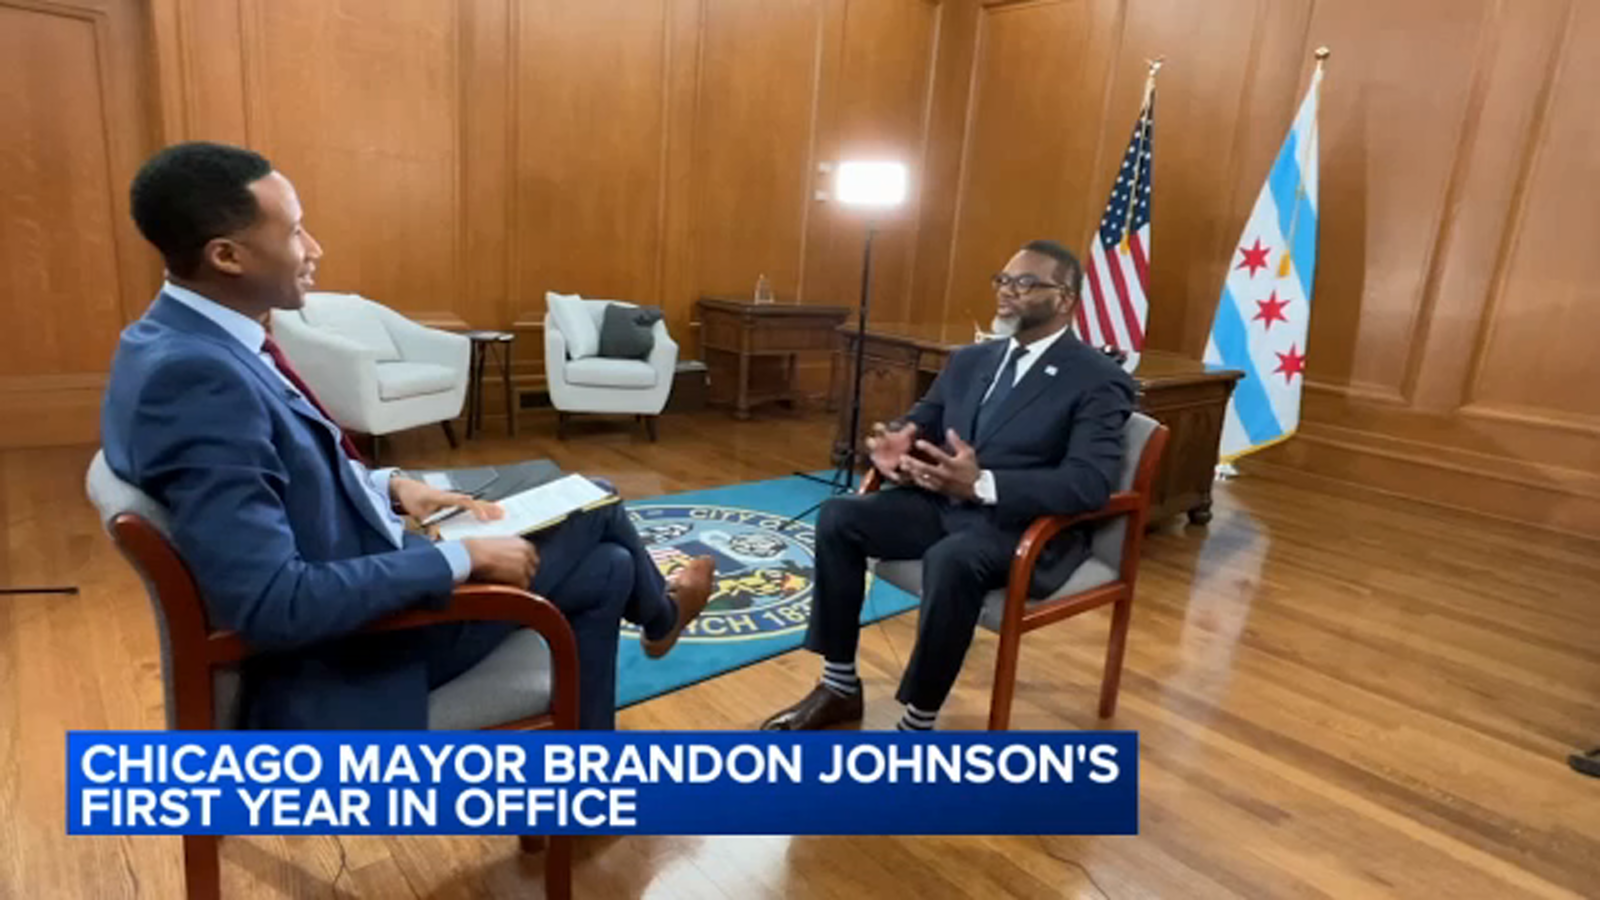 Brandon Johnson, Chicago mayor, evaluates first year in office during one-on-one interview with ABC7’s Terrell Brown [Video]